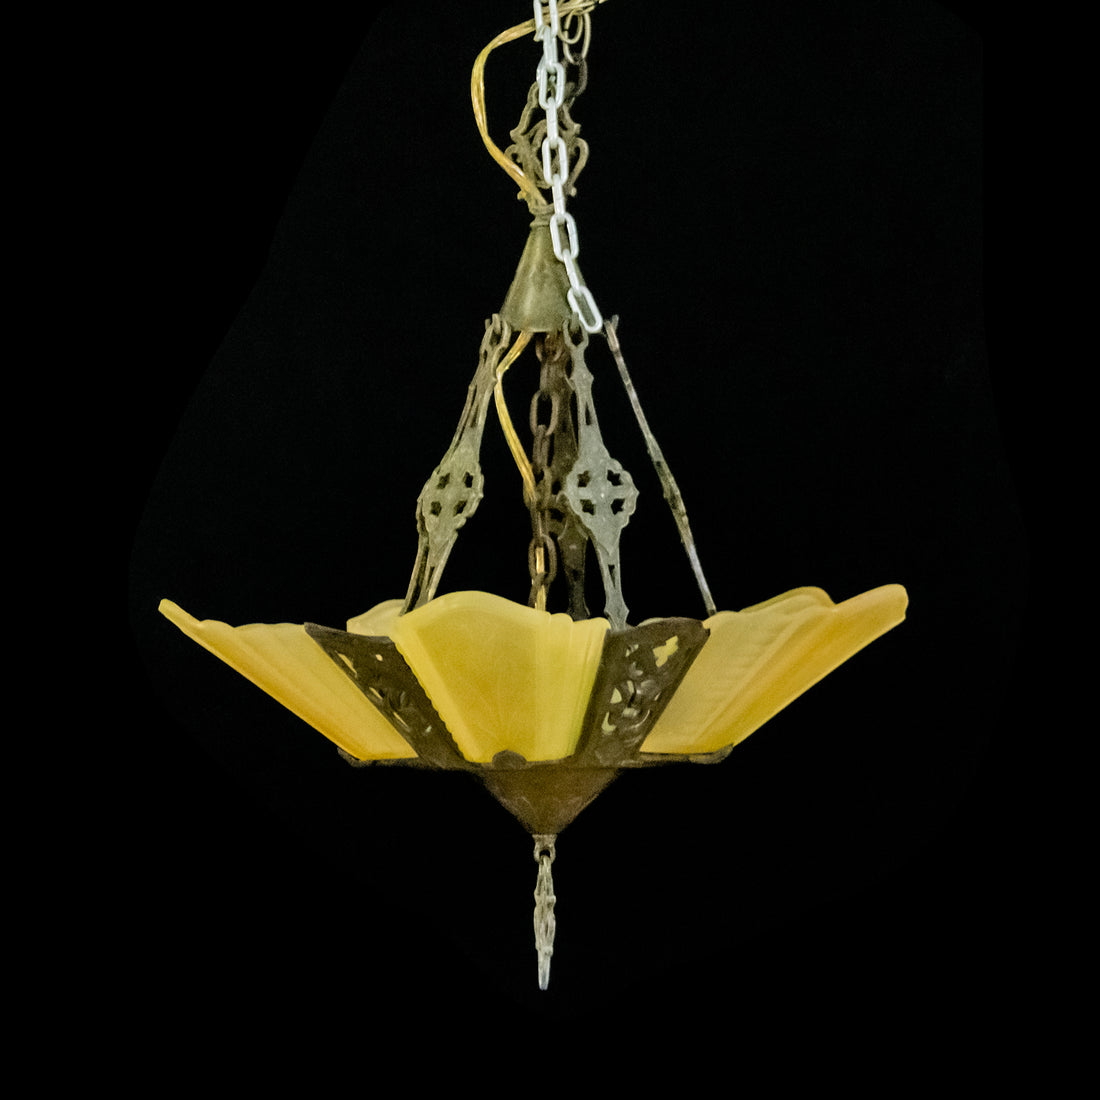 Antique Slip Shade Chandelier with Patinated Brass Finish